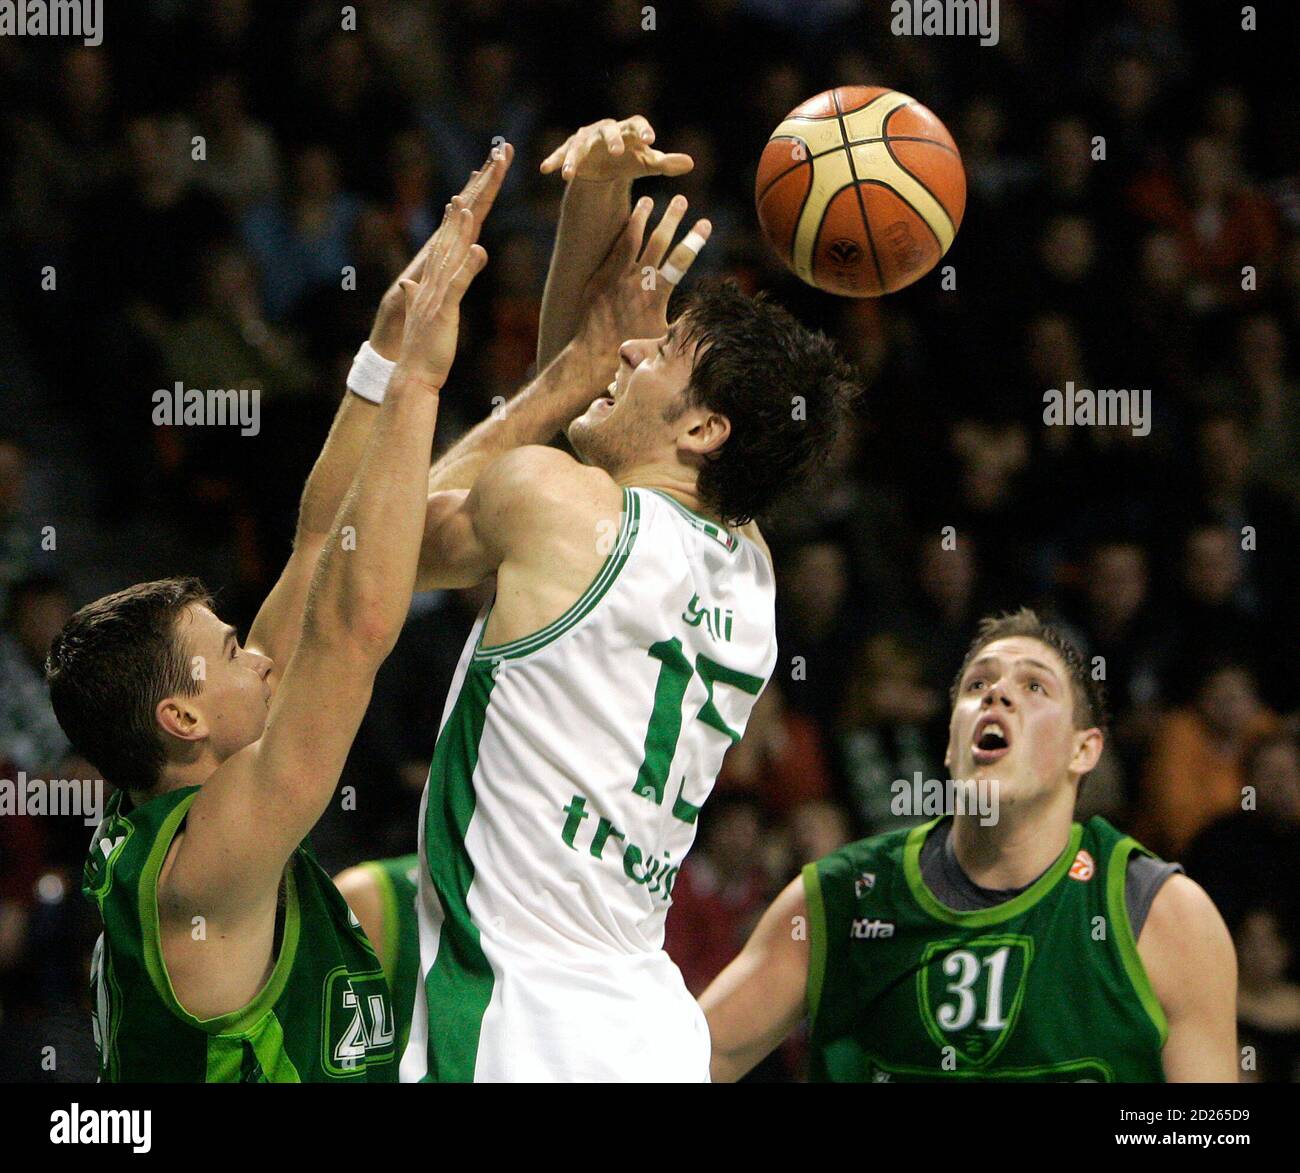 Benetton Treviso's Angelo Gigli (C) fights for ball with BC Zalgiris' Kirk  Penney (L) and Vladimir Stimac during their men's Euroleague regular season  Group C basketball game in Kaunas, Lithiuania, December 14,